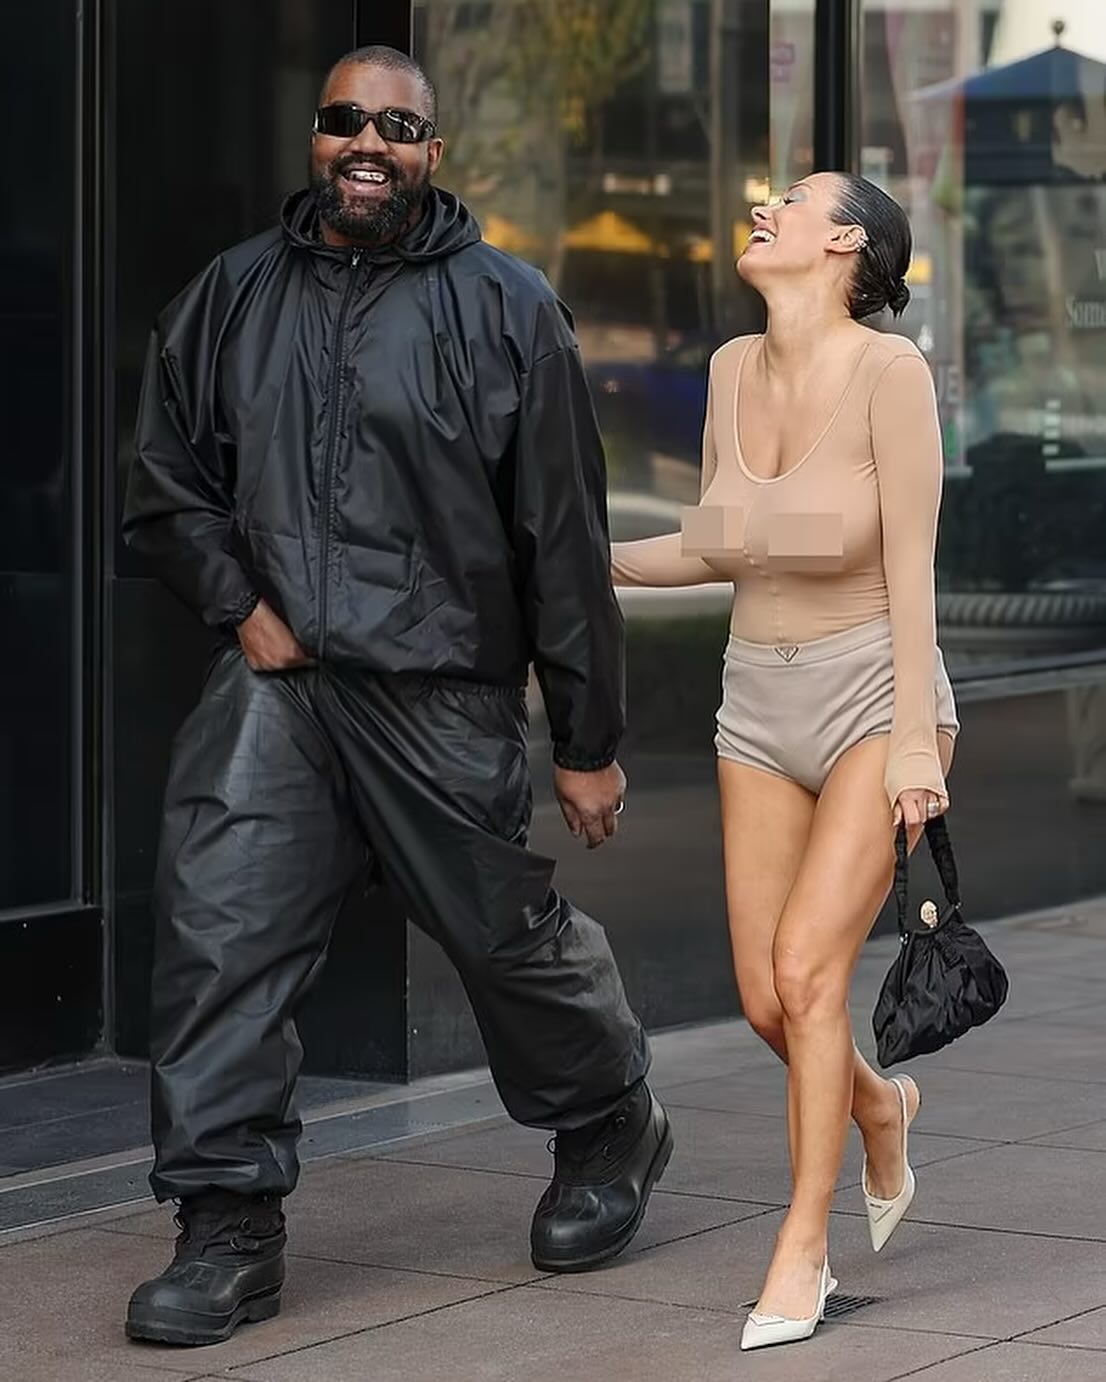 Ye on X: "BIANCA CENSORI spotted so happy with KANYE WEST by being together   https://t.co/Ipwhr9XBPZ" / X